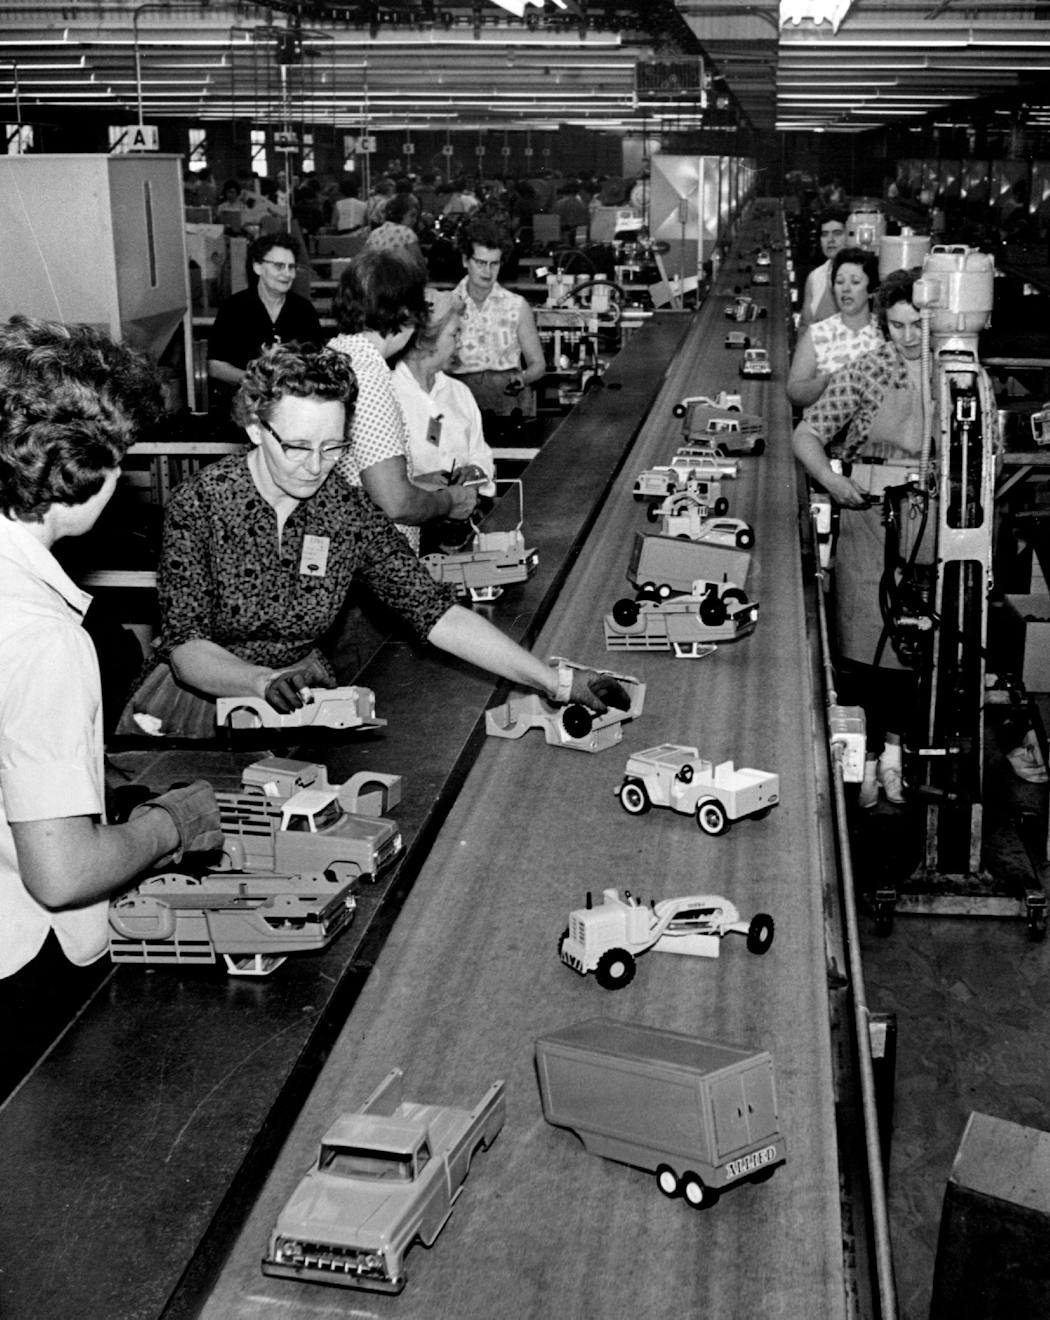 The assembly line at Tonka's Mound plant in 1965.